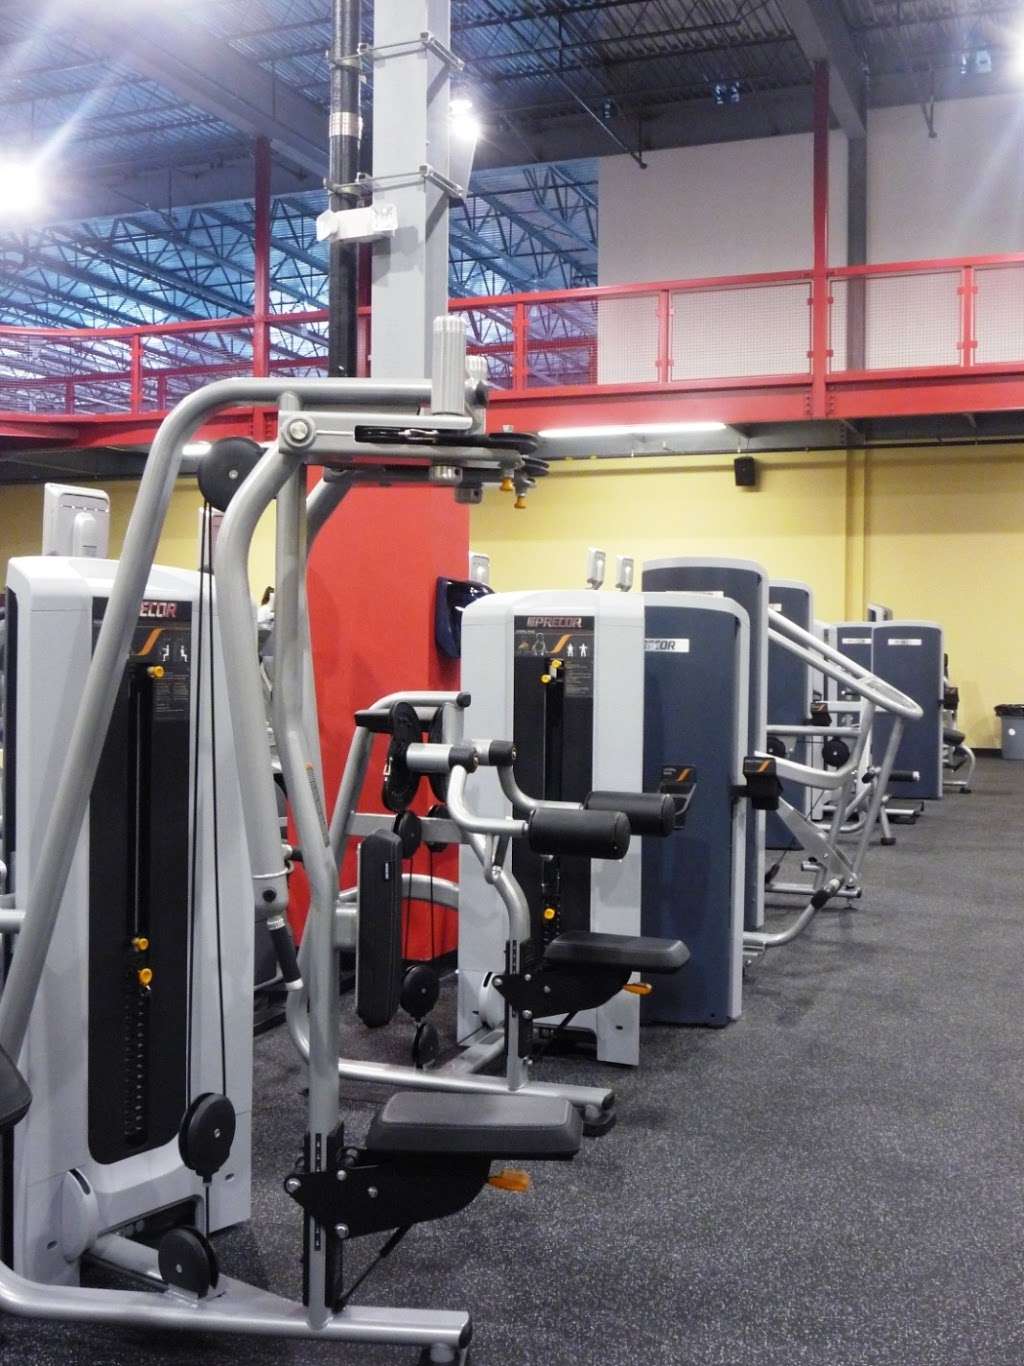 24/7 Family Fitness | 333 Tosca Dr, Stoughton, MA 02072 | Phone: (781) 344-2222